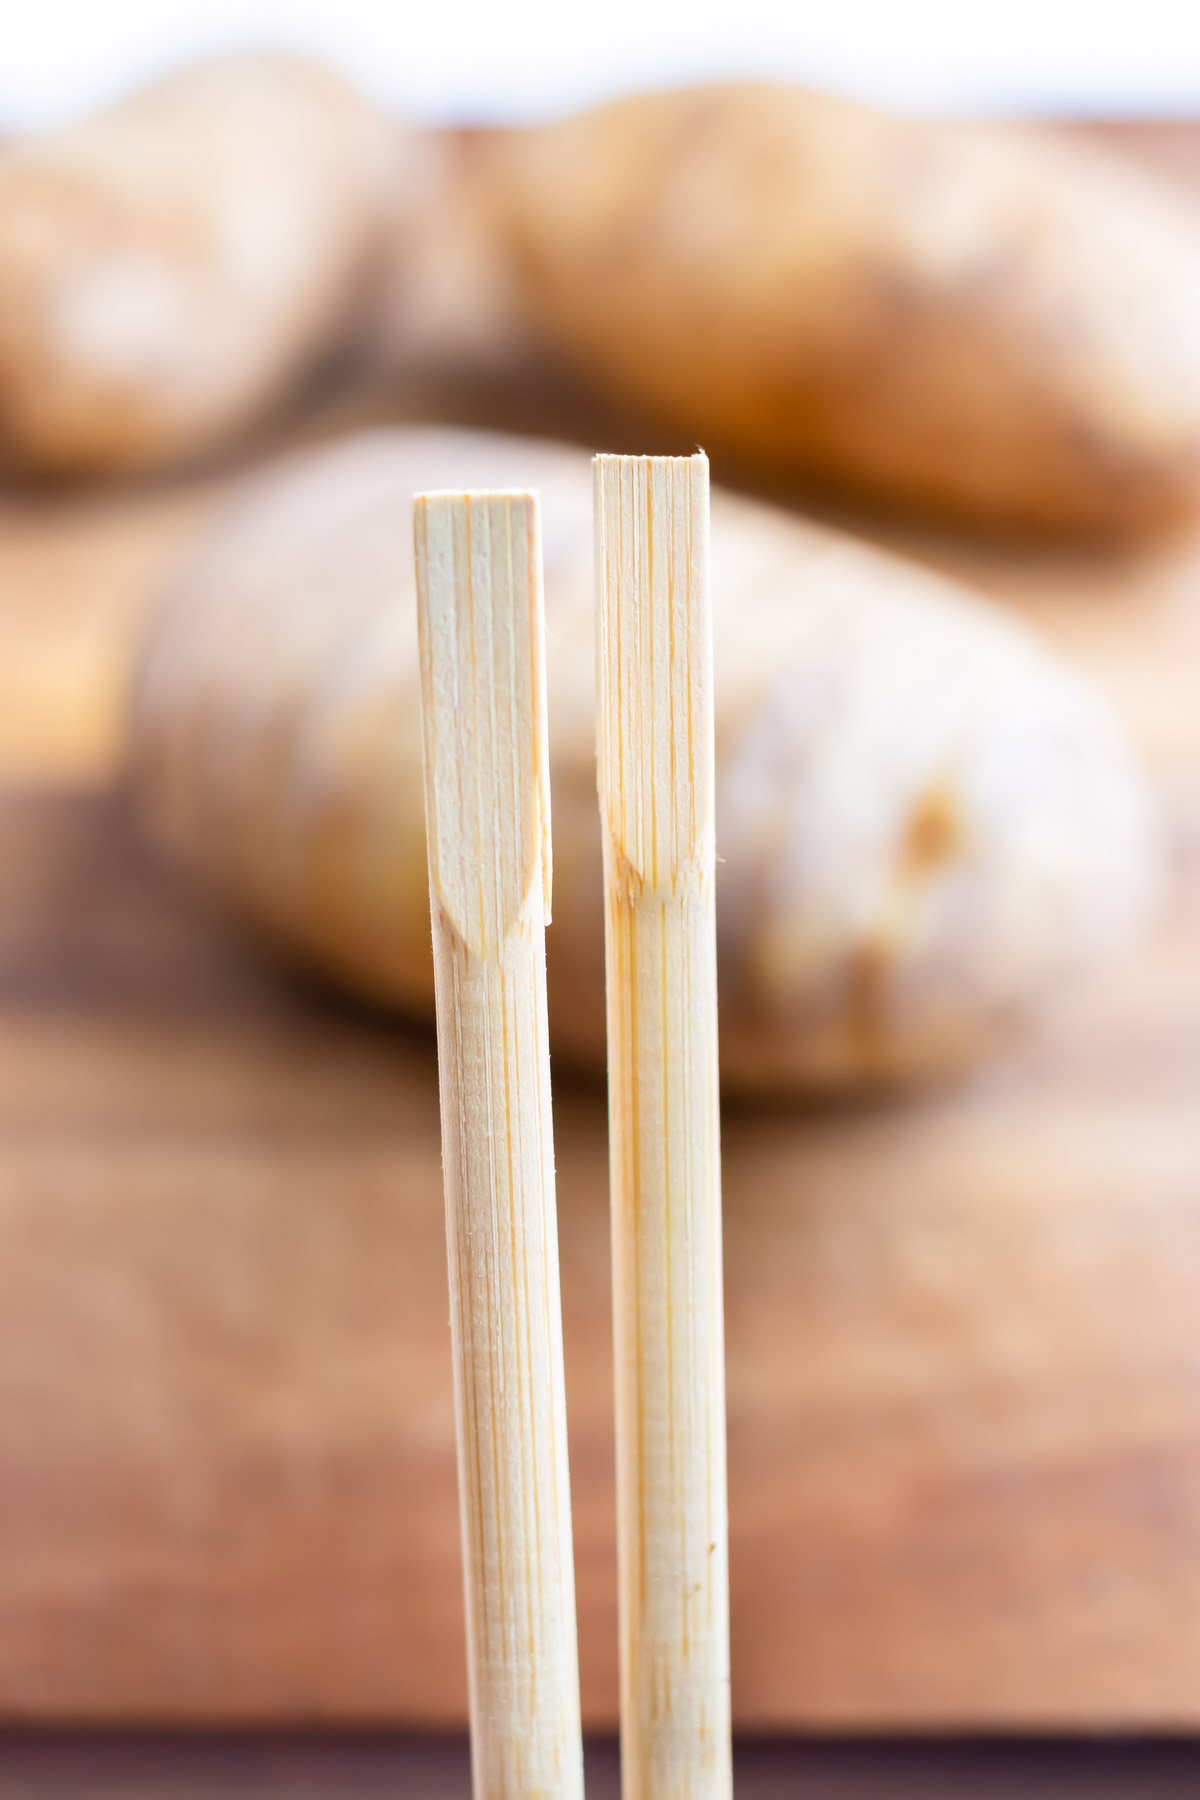 Square chopsticks are used to help cut the potato.